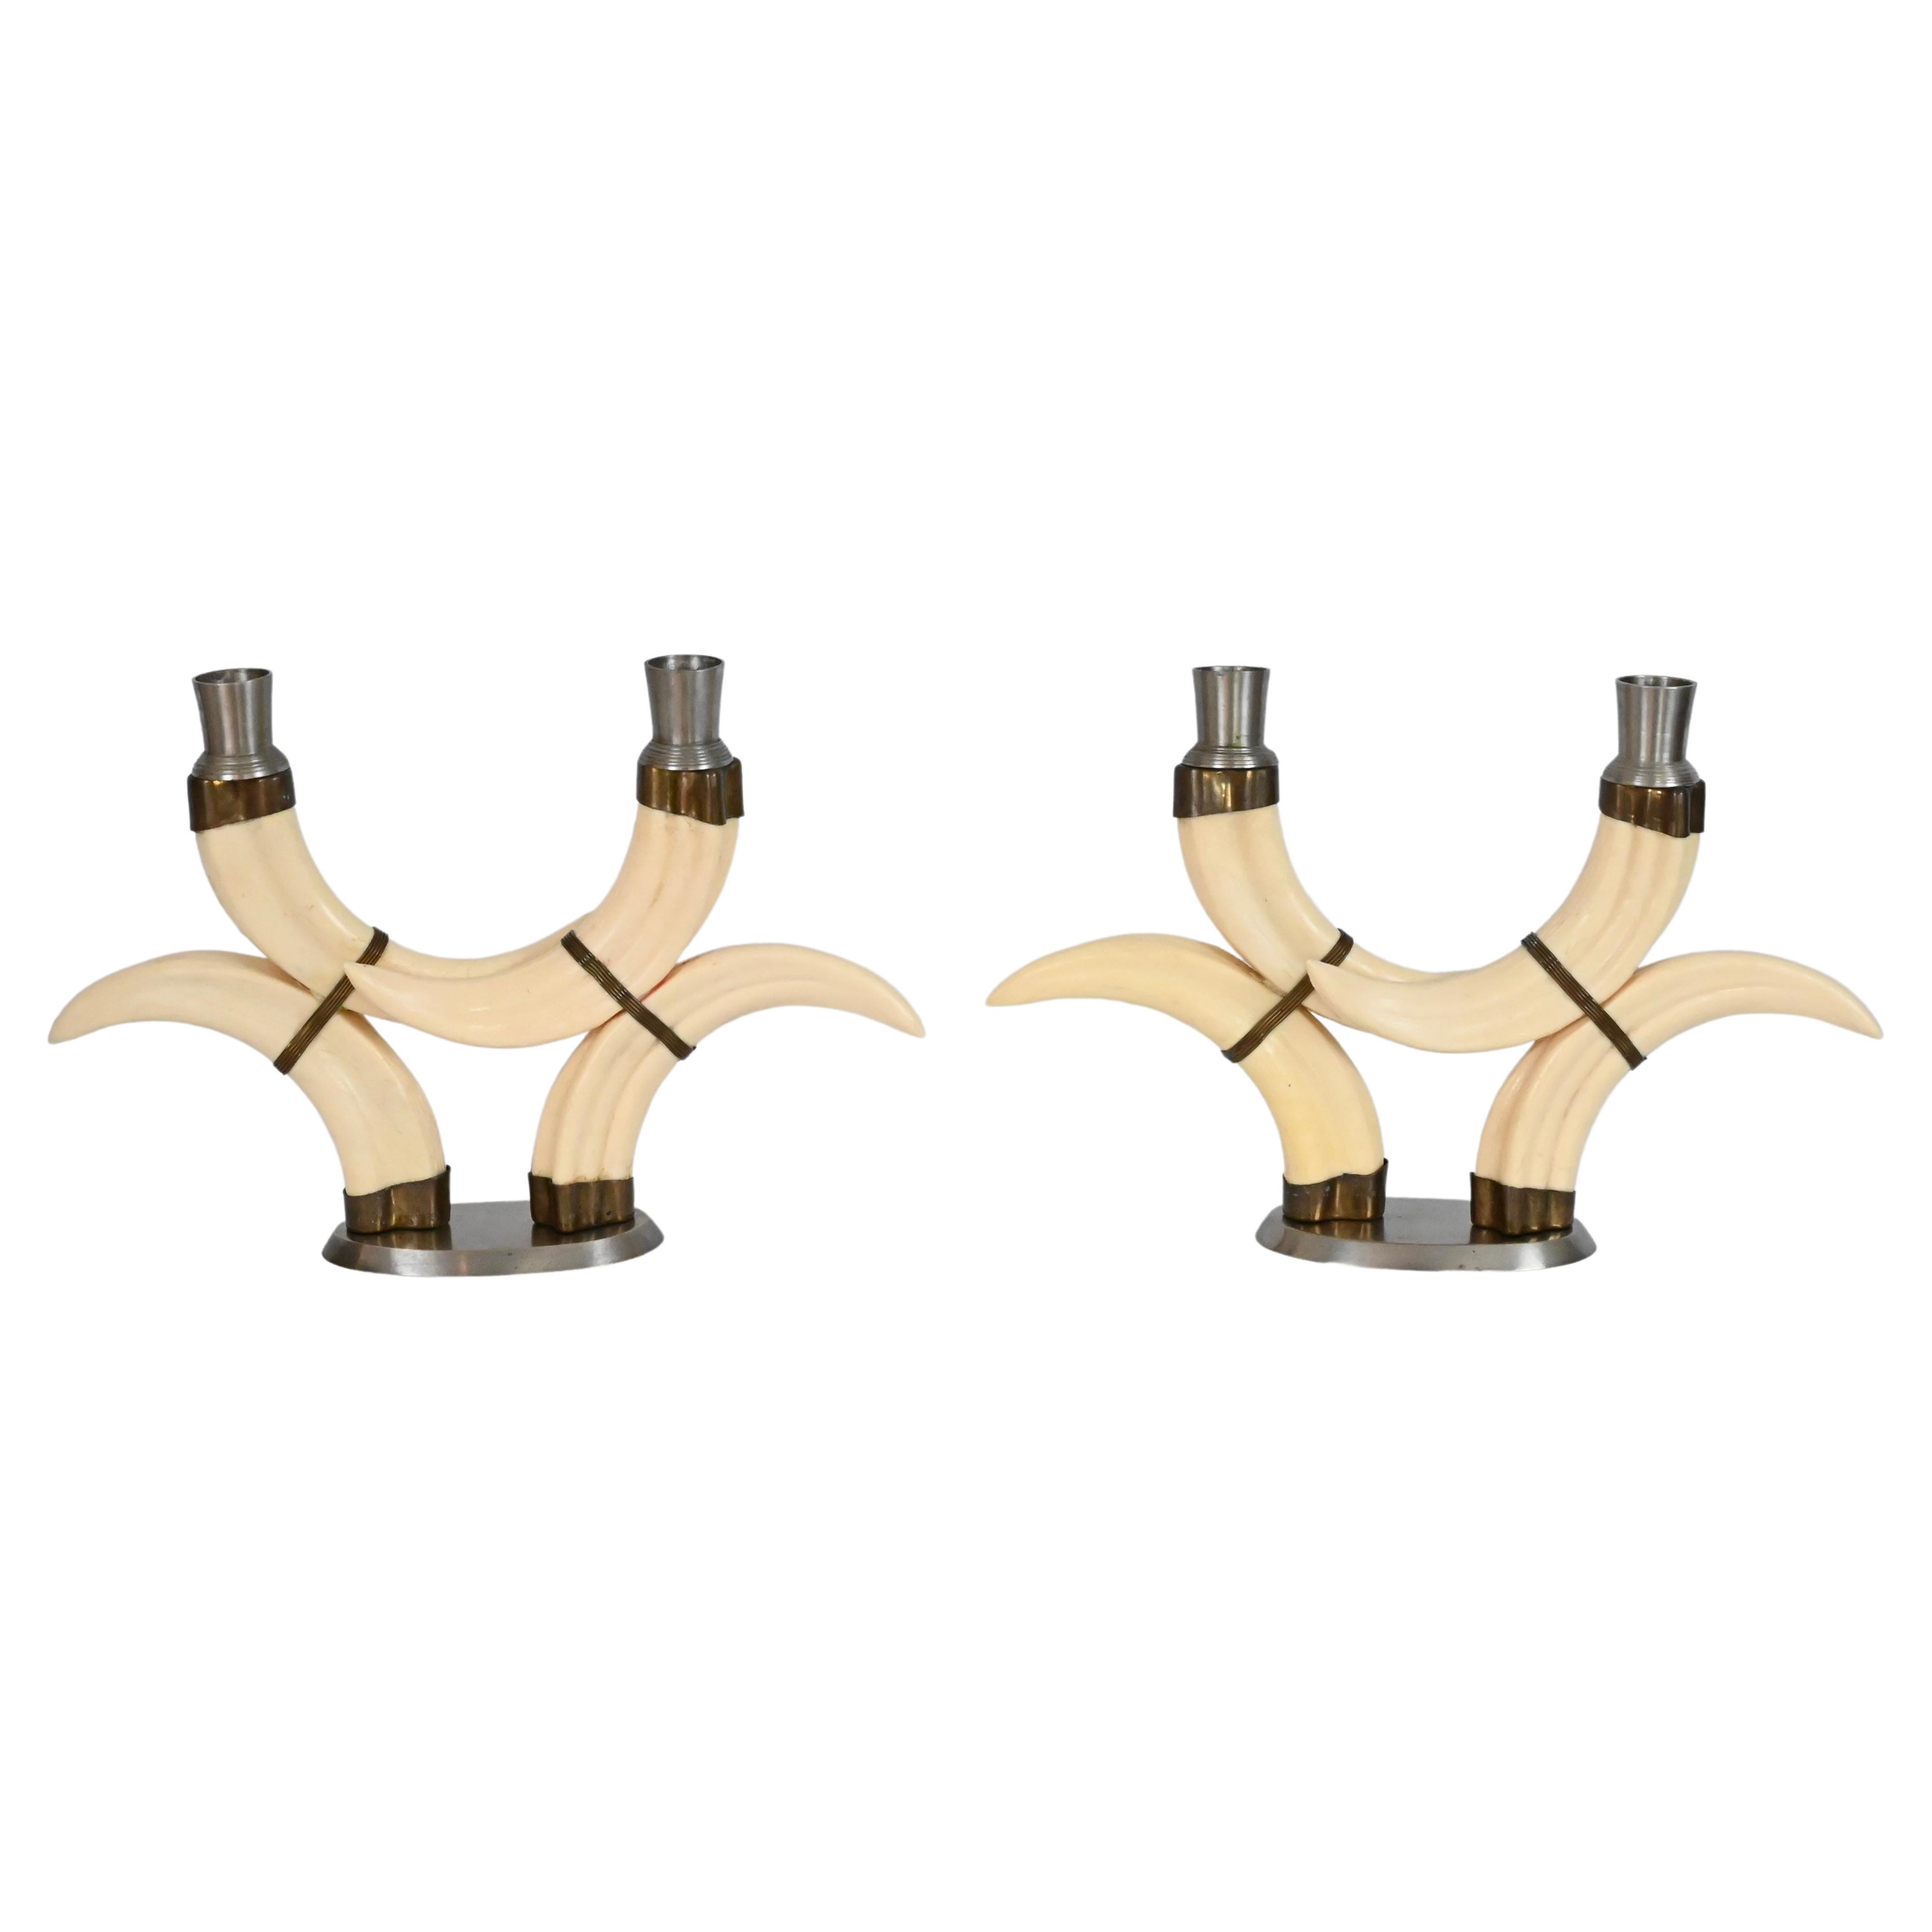 Pair of Beige Faux Horn Candlesticks Mounted in Nickel For Sale